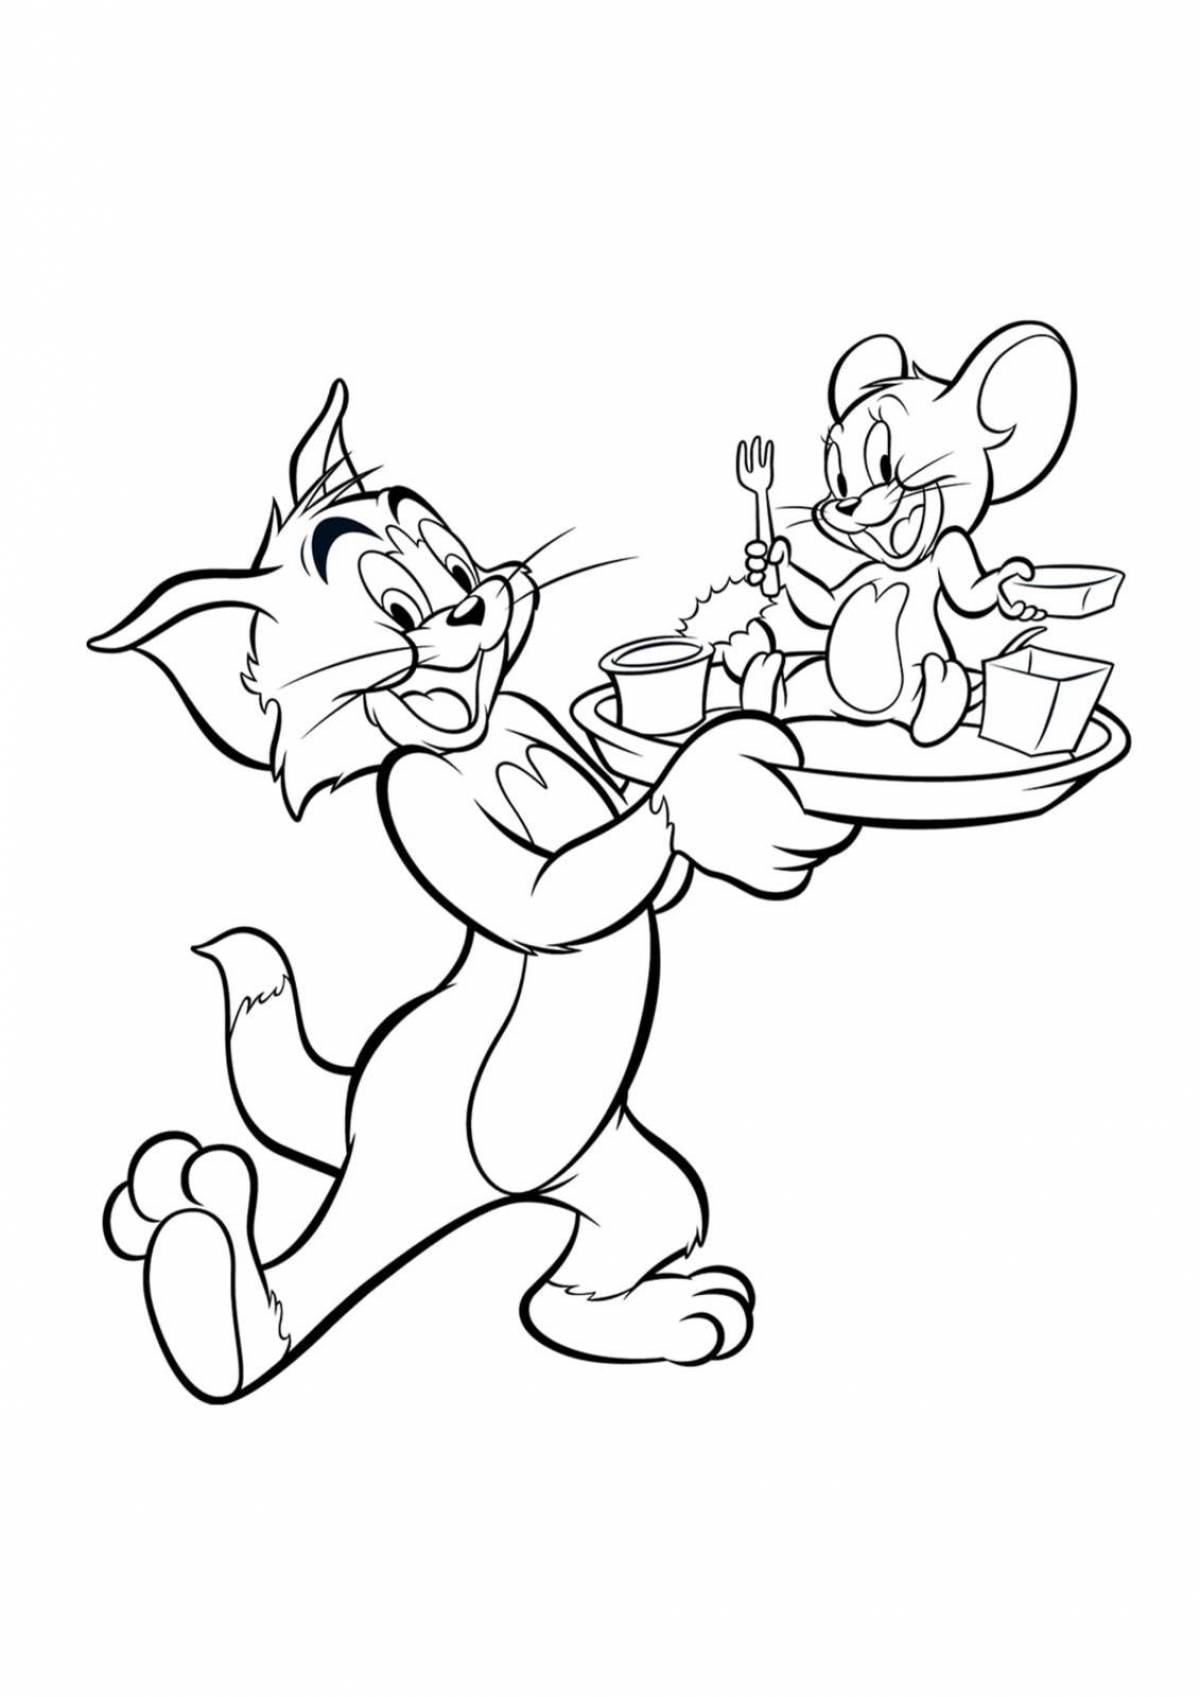 Outstanding tom and jerry coloring book for kids